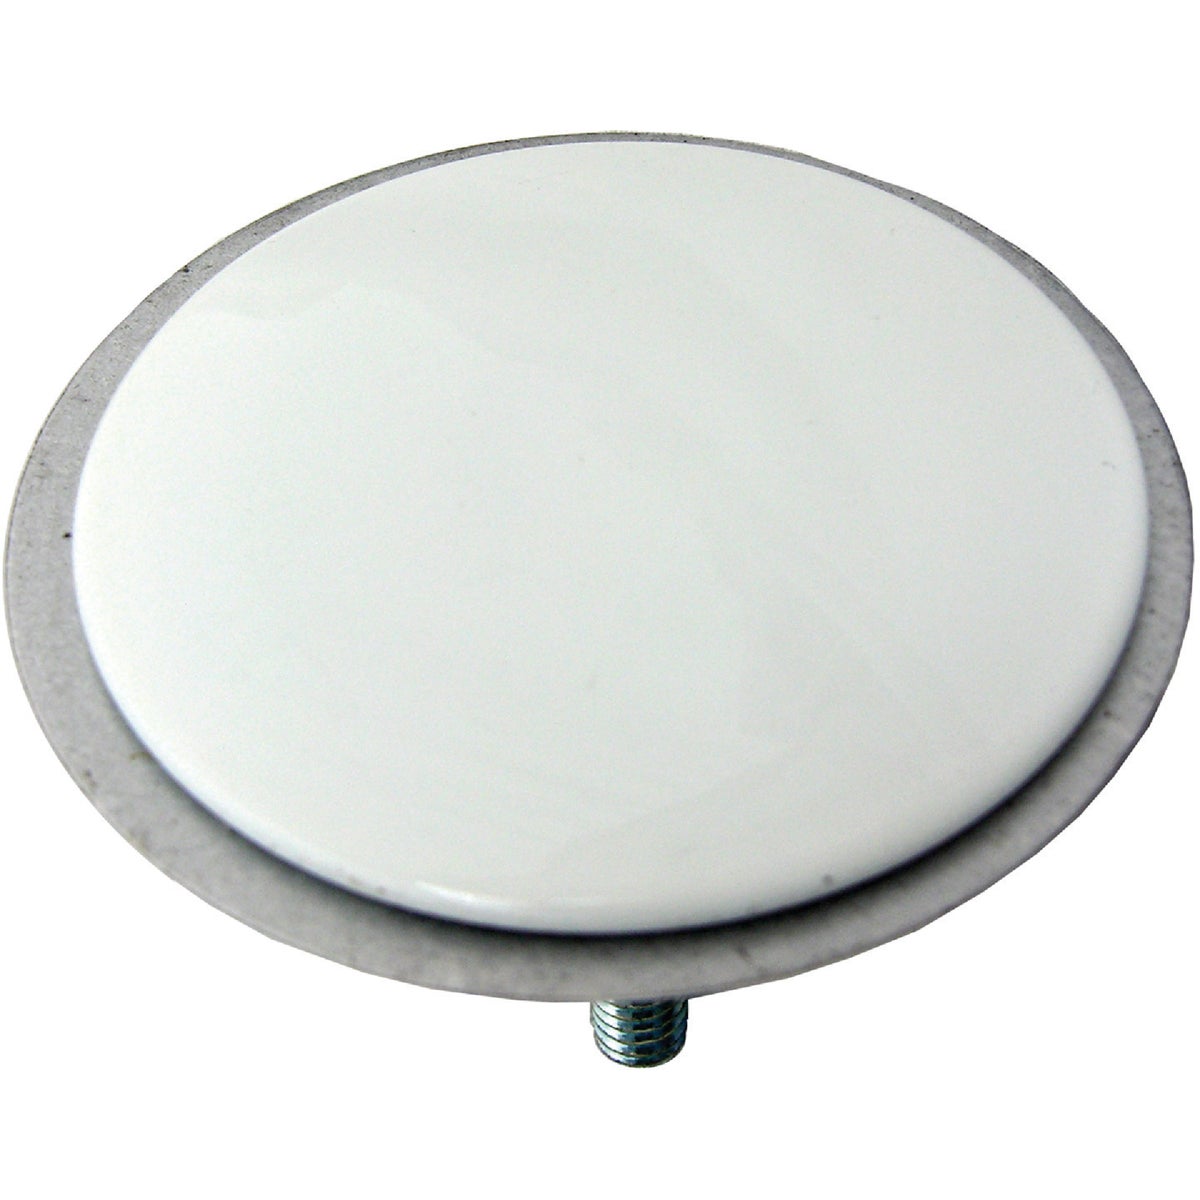 Lasco 2 In. White Faucet Hole Cover